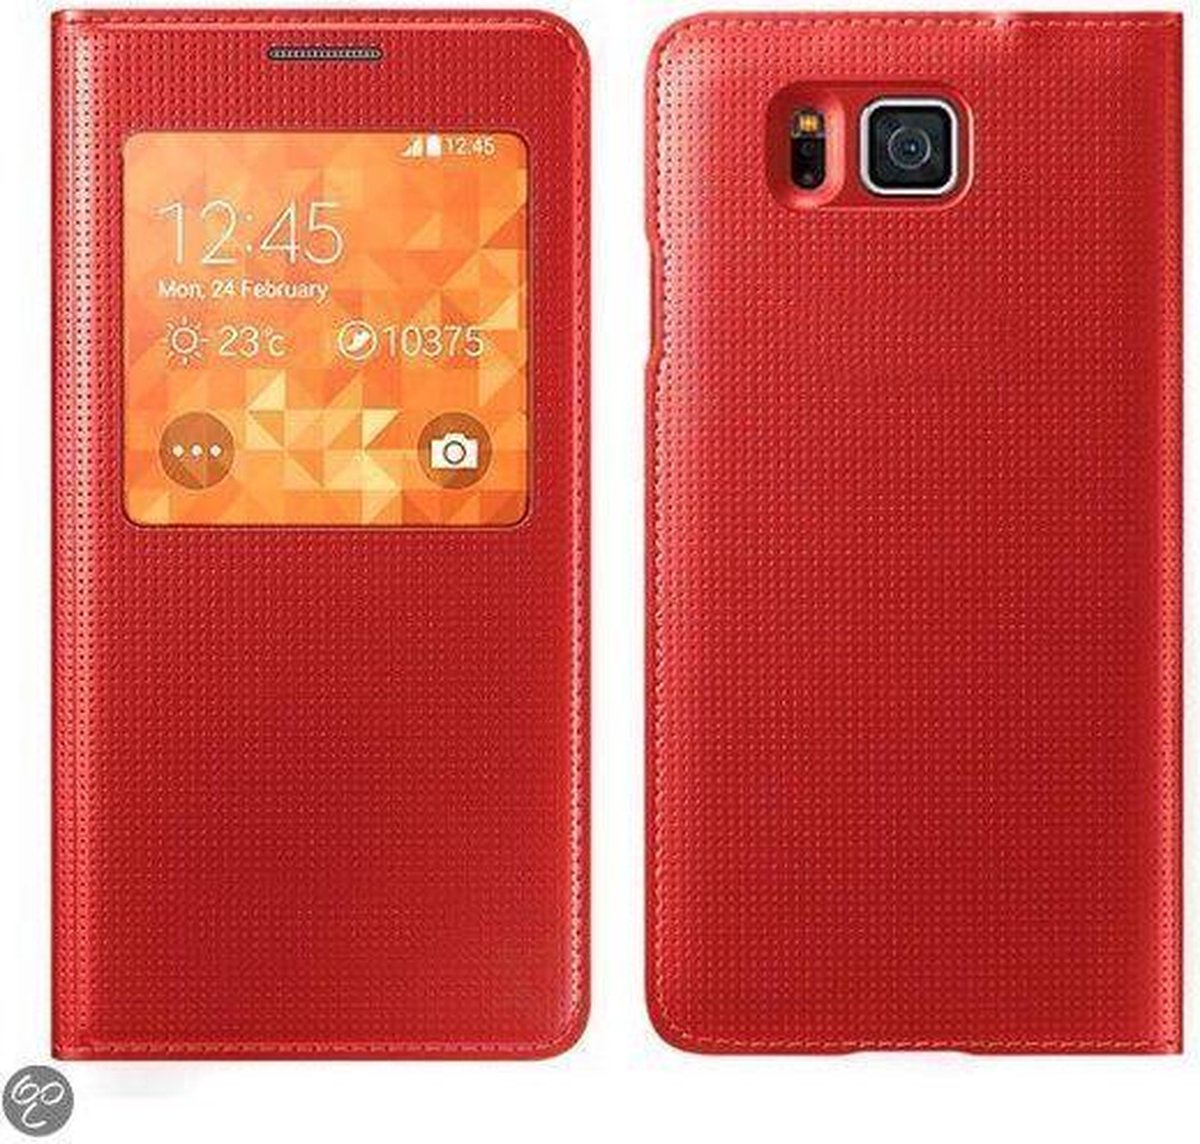 Samsung Galaxy Alpha G850F S view cover case Rood Red